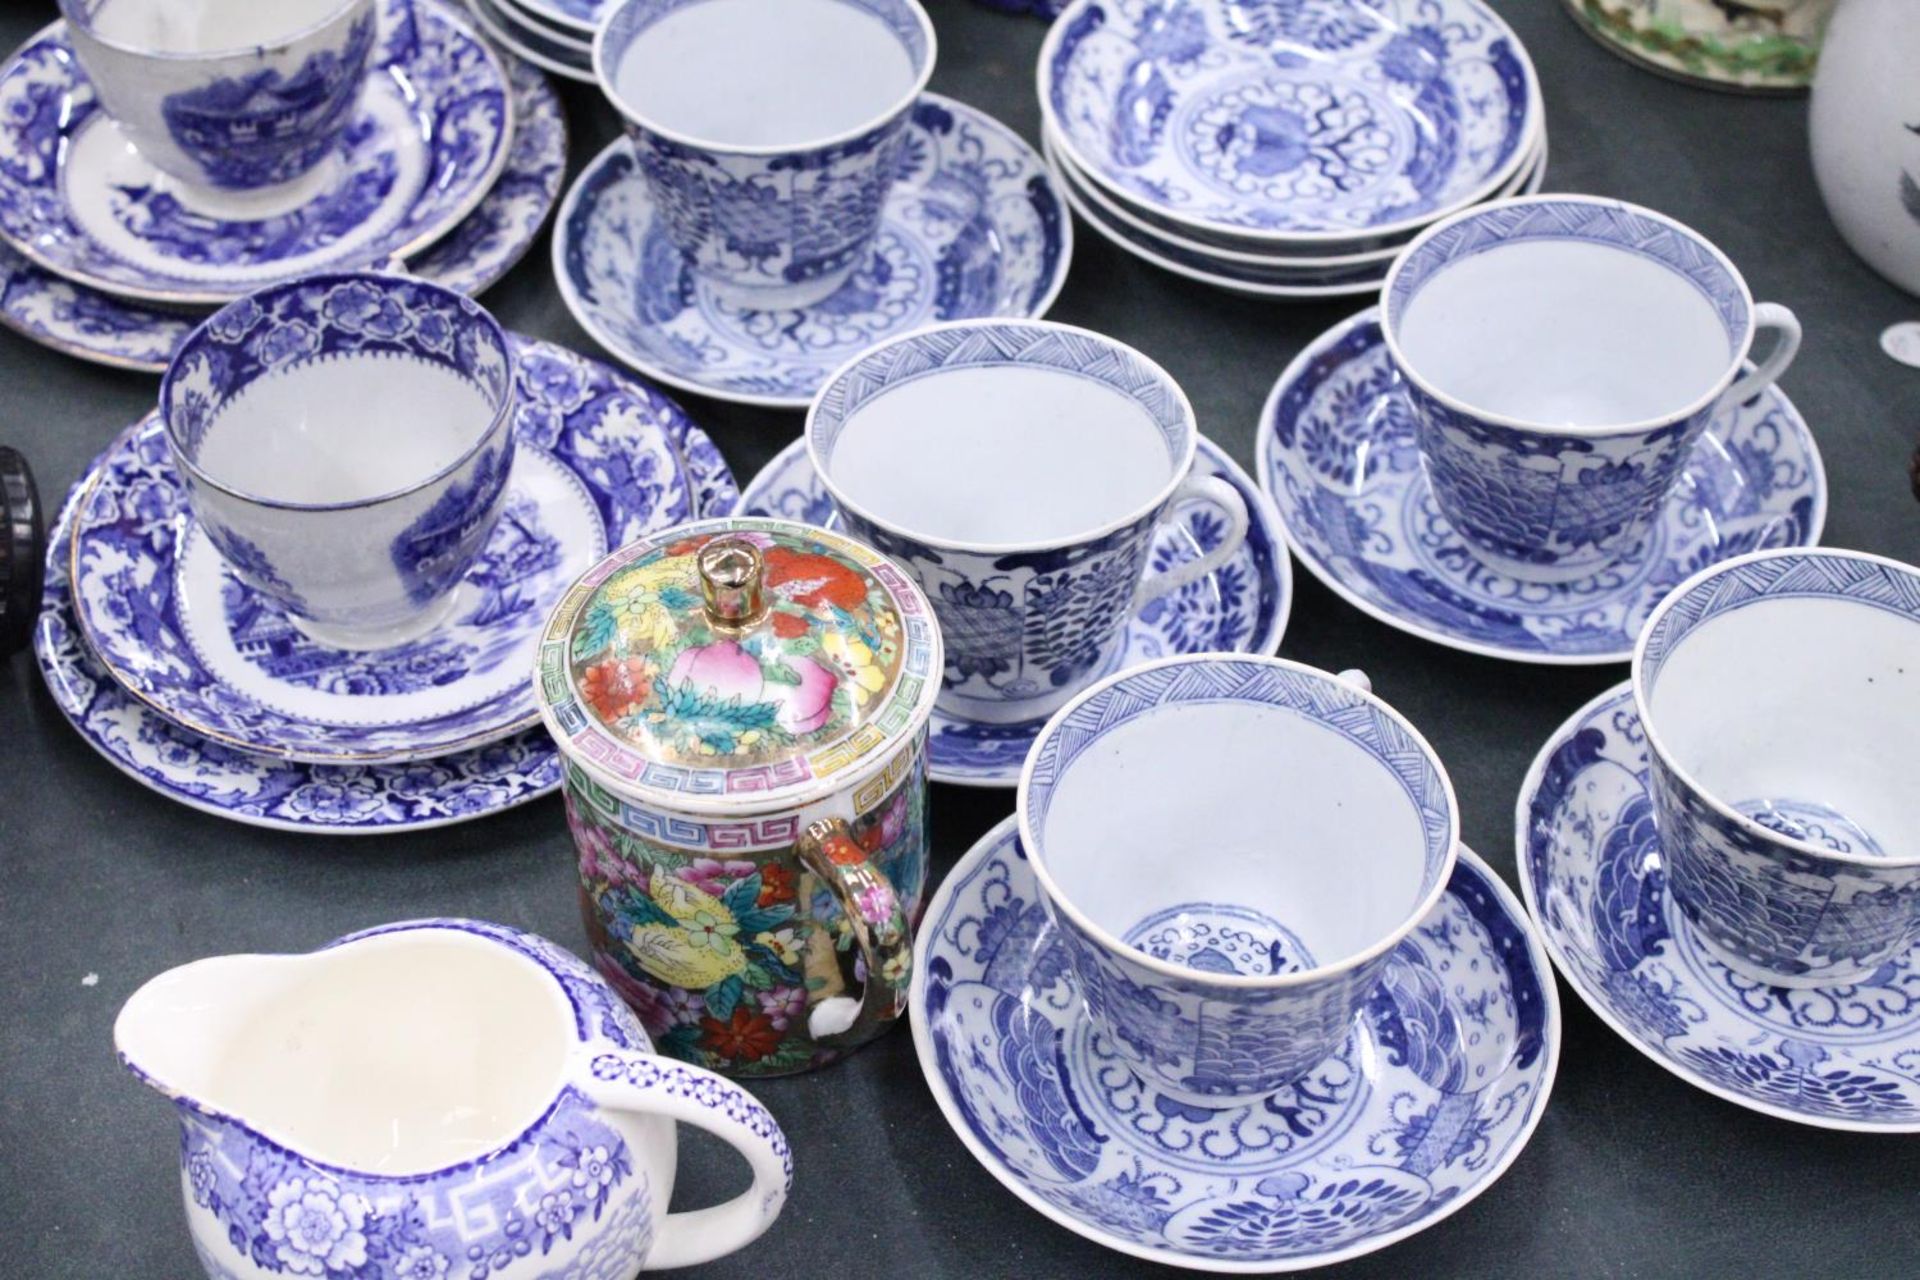 A LARGE QUANTITY OF ORIENTAL STYLE BLUE AND WHITE TO INCLUDE CUPS,SAUCERS,SIDE PLATES PLUS A JUG AND - Image 4 of 6